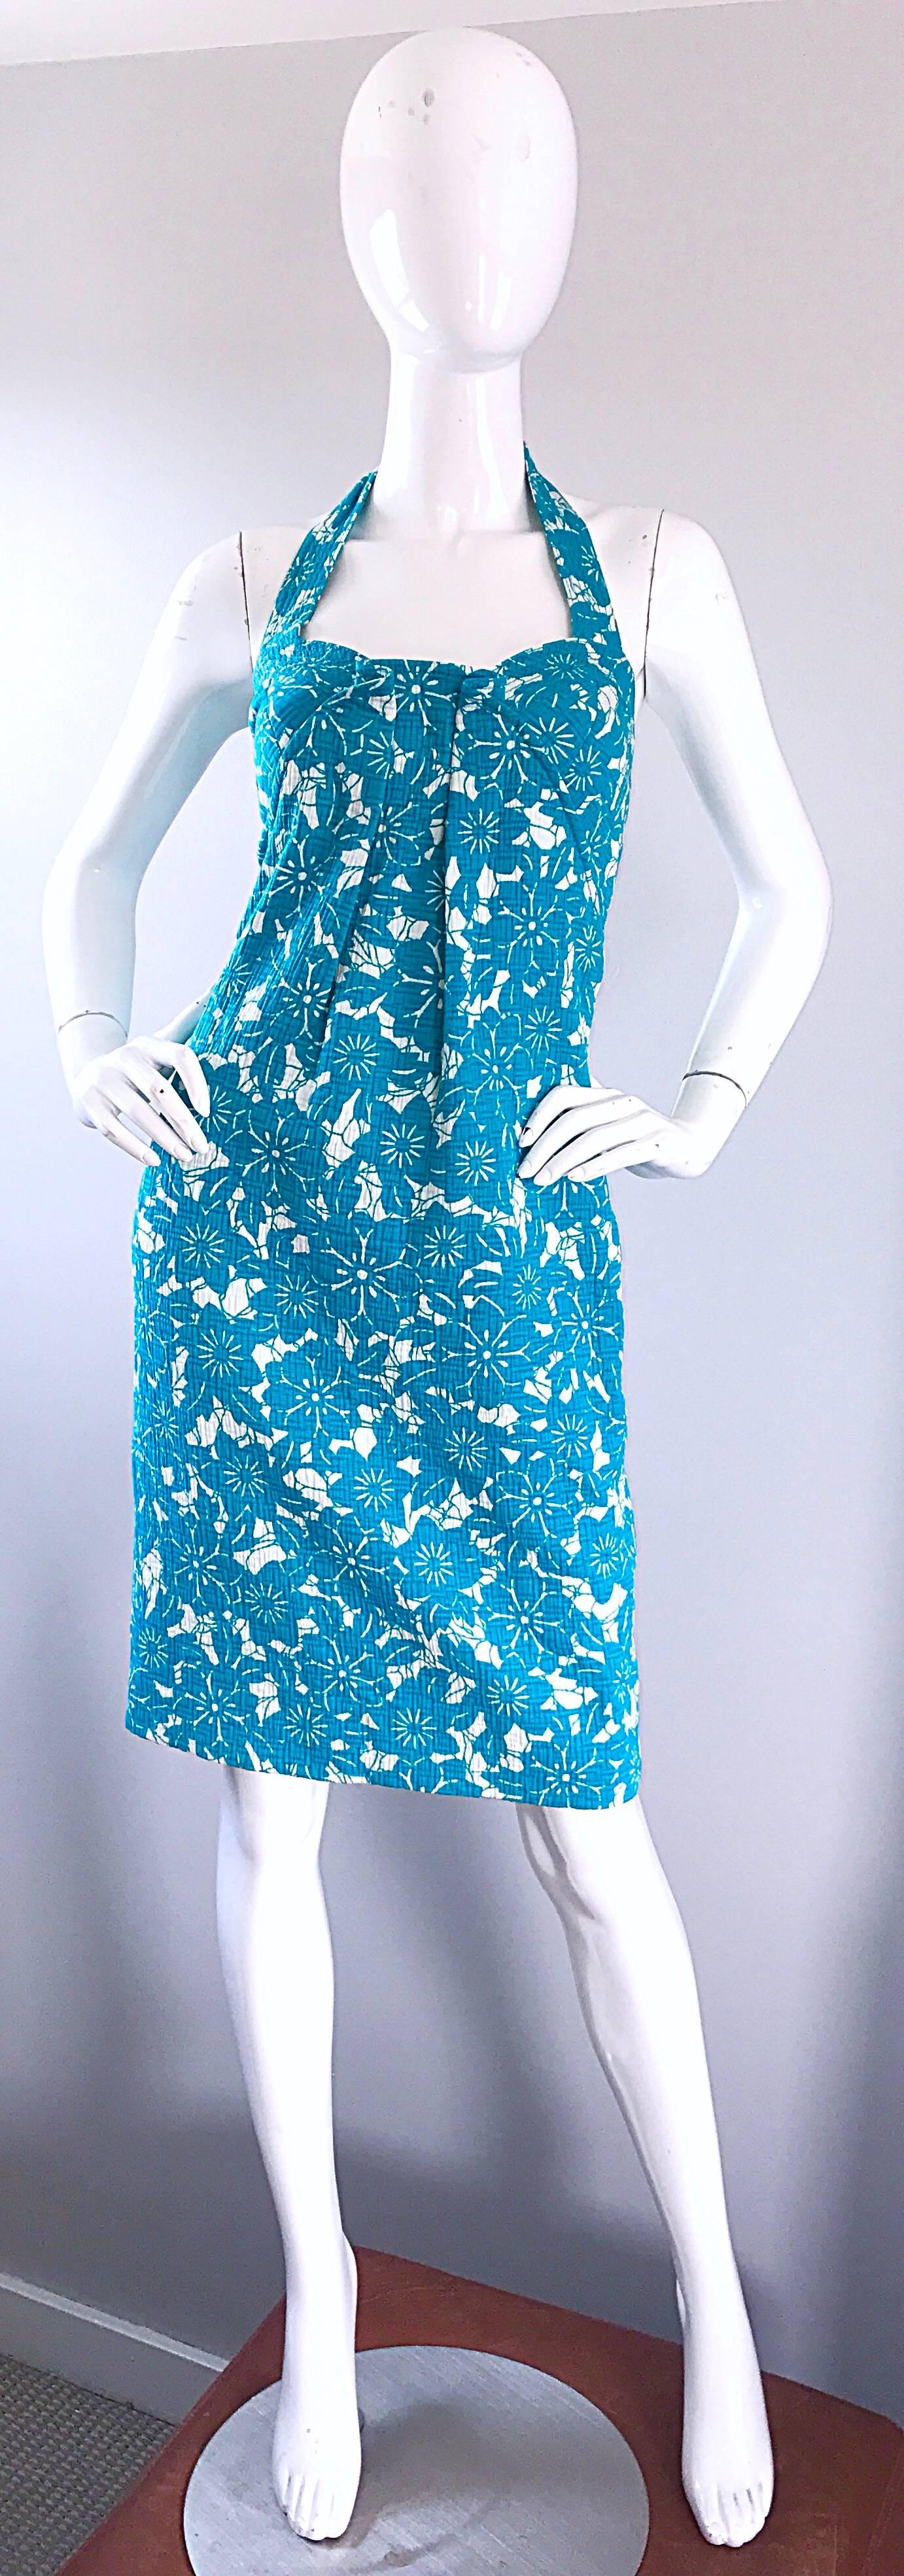 Chic vintage OSCAR DE LA RENTA turquoise blue and white Hawaiian tropical print empire waist halter dress! Features a luxurious thick cotton that is fully lined in silk. Hidden zipper up the back with hook-and-eye closure. Ties at the back neck.